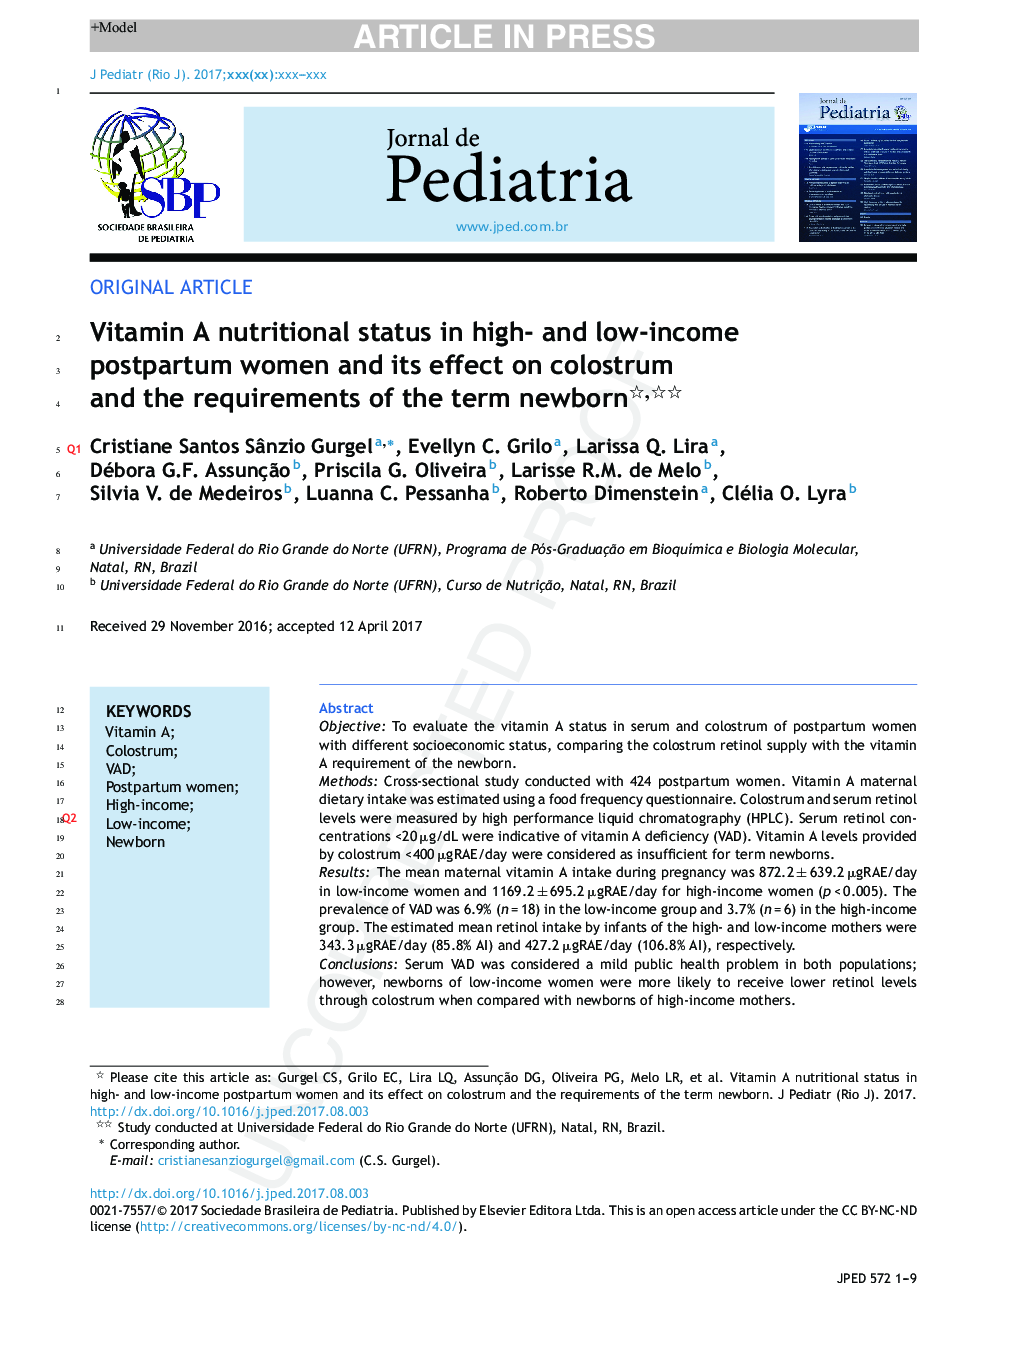 Vitamin A nutritional status in high- and low-income postpartum women and its effect on colostrum and the requirements of the term newborn